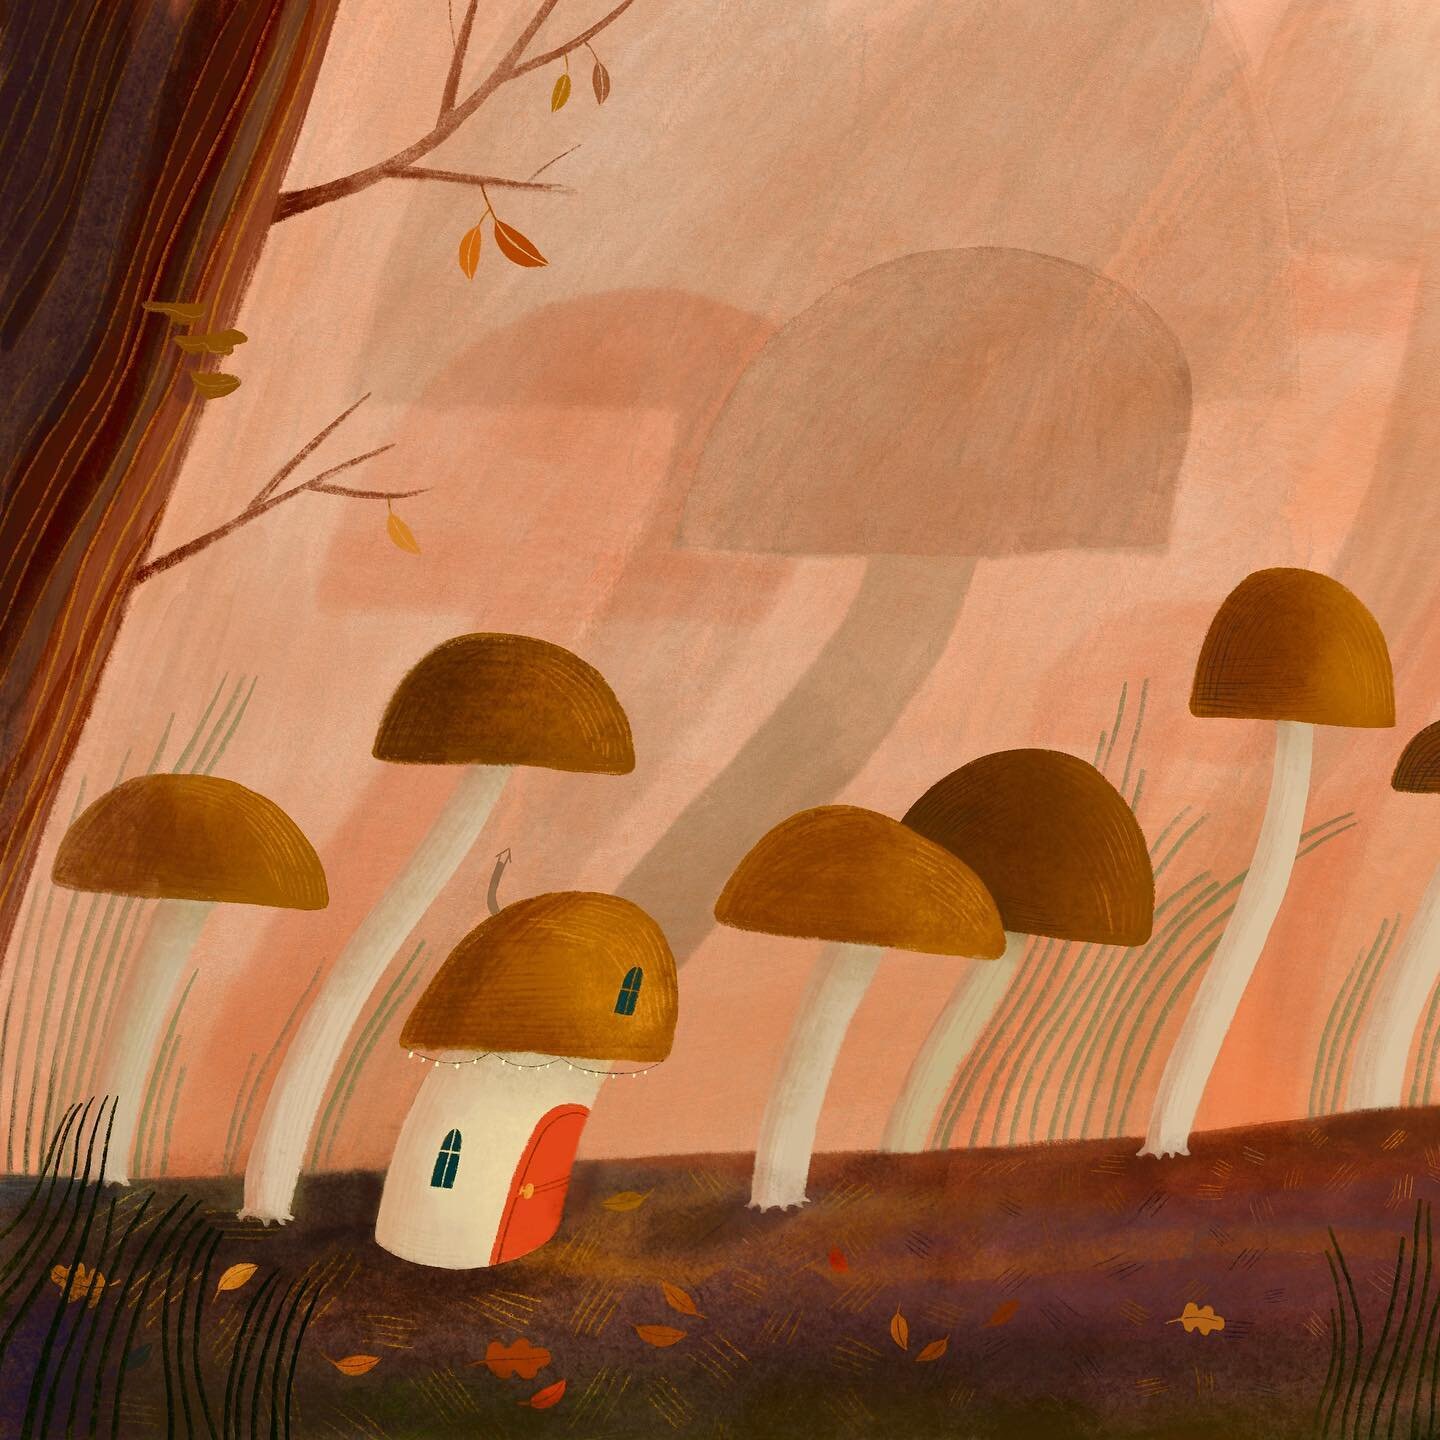 acorn treasure hunt🍄🍂🍁 
.
if I lived in this cute mushroom house I would never want to leave, but squirrels are weird
.
#picturebook #picturebookillustration #forestillustration #mushrooms #mushroomforest #mushroomhouse #squirrels #fallillustratio